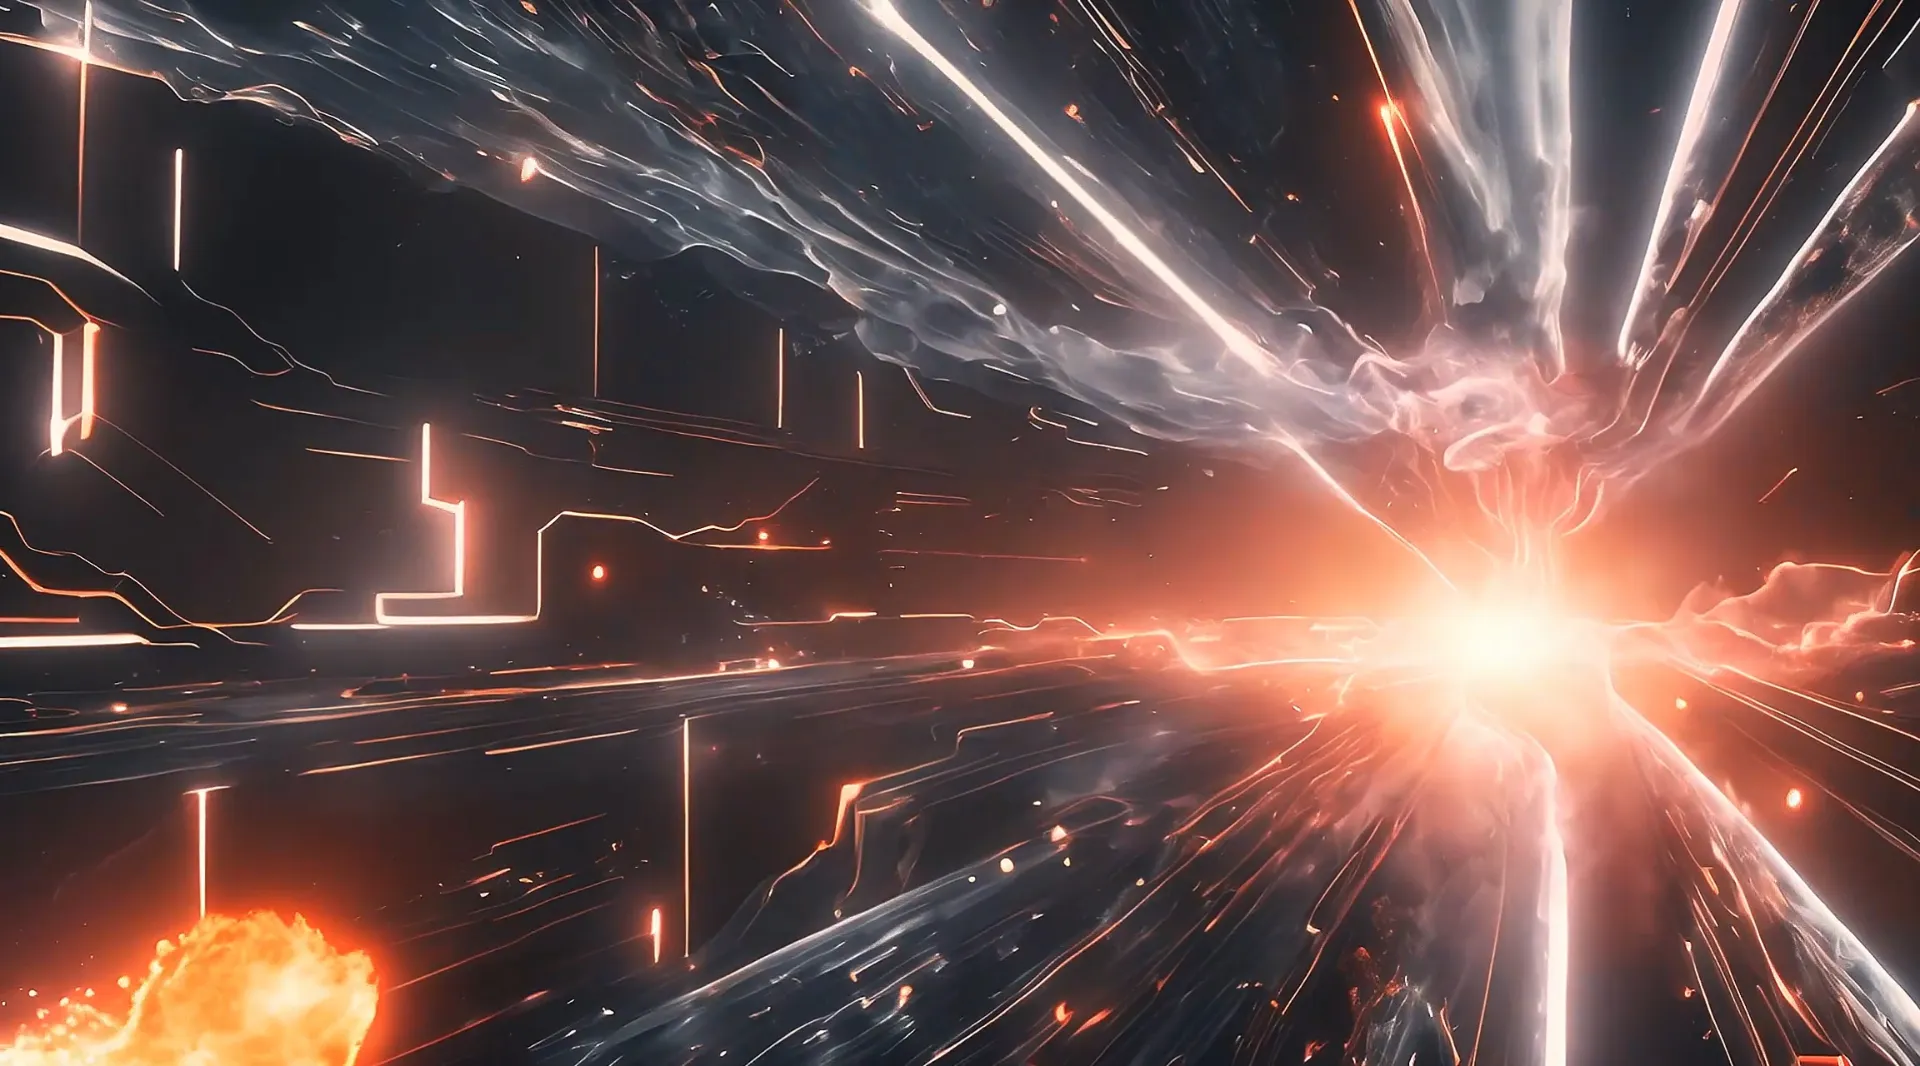 Futuristic Digital Space Warp Motion Backdrop for Sci-Fi Projects